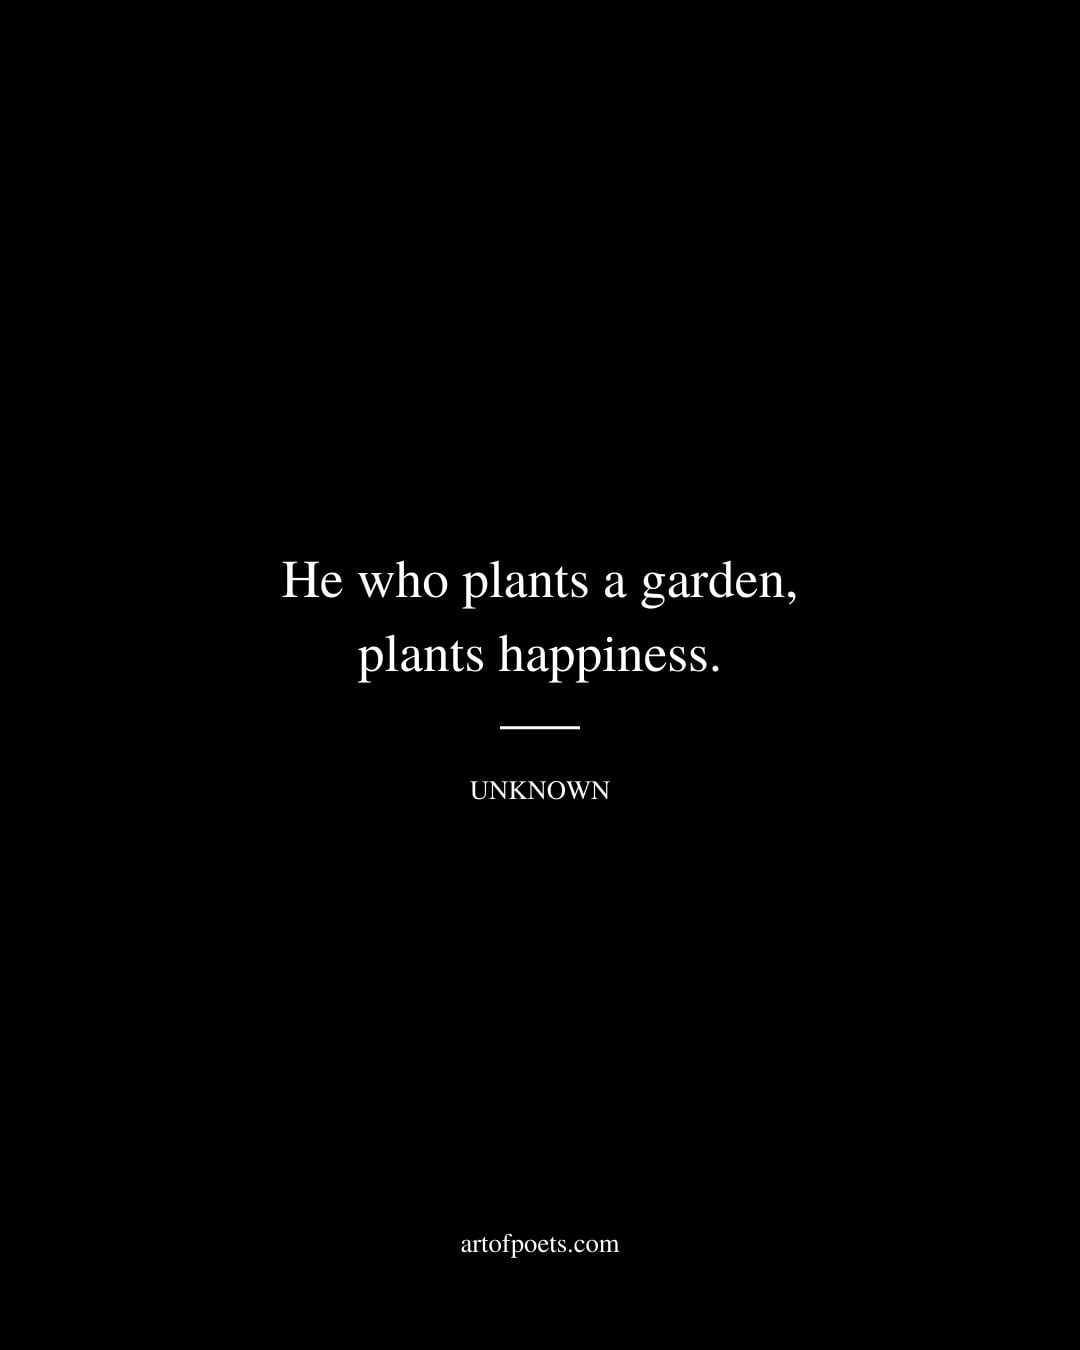 He who plants a garden plants happiness. Author Unknown